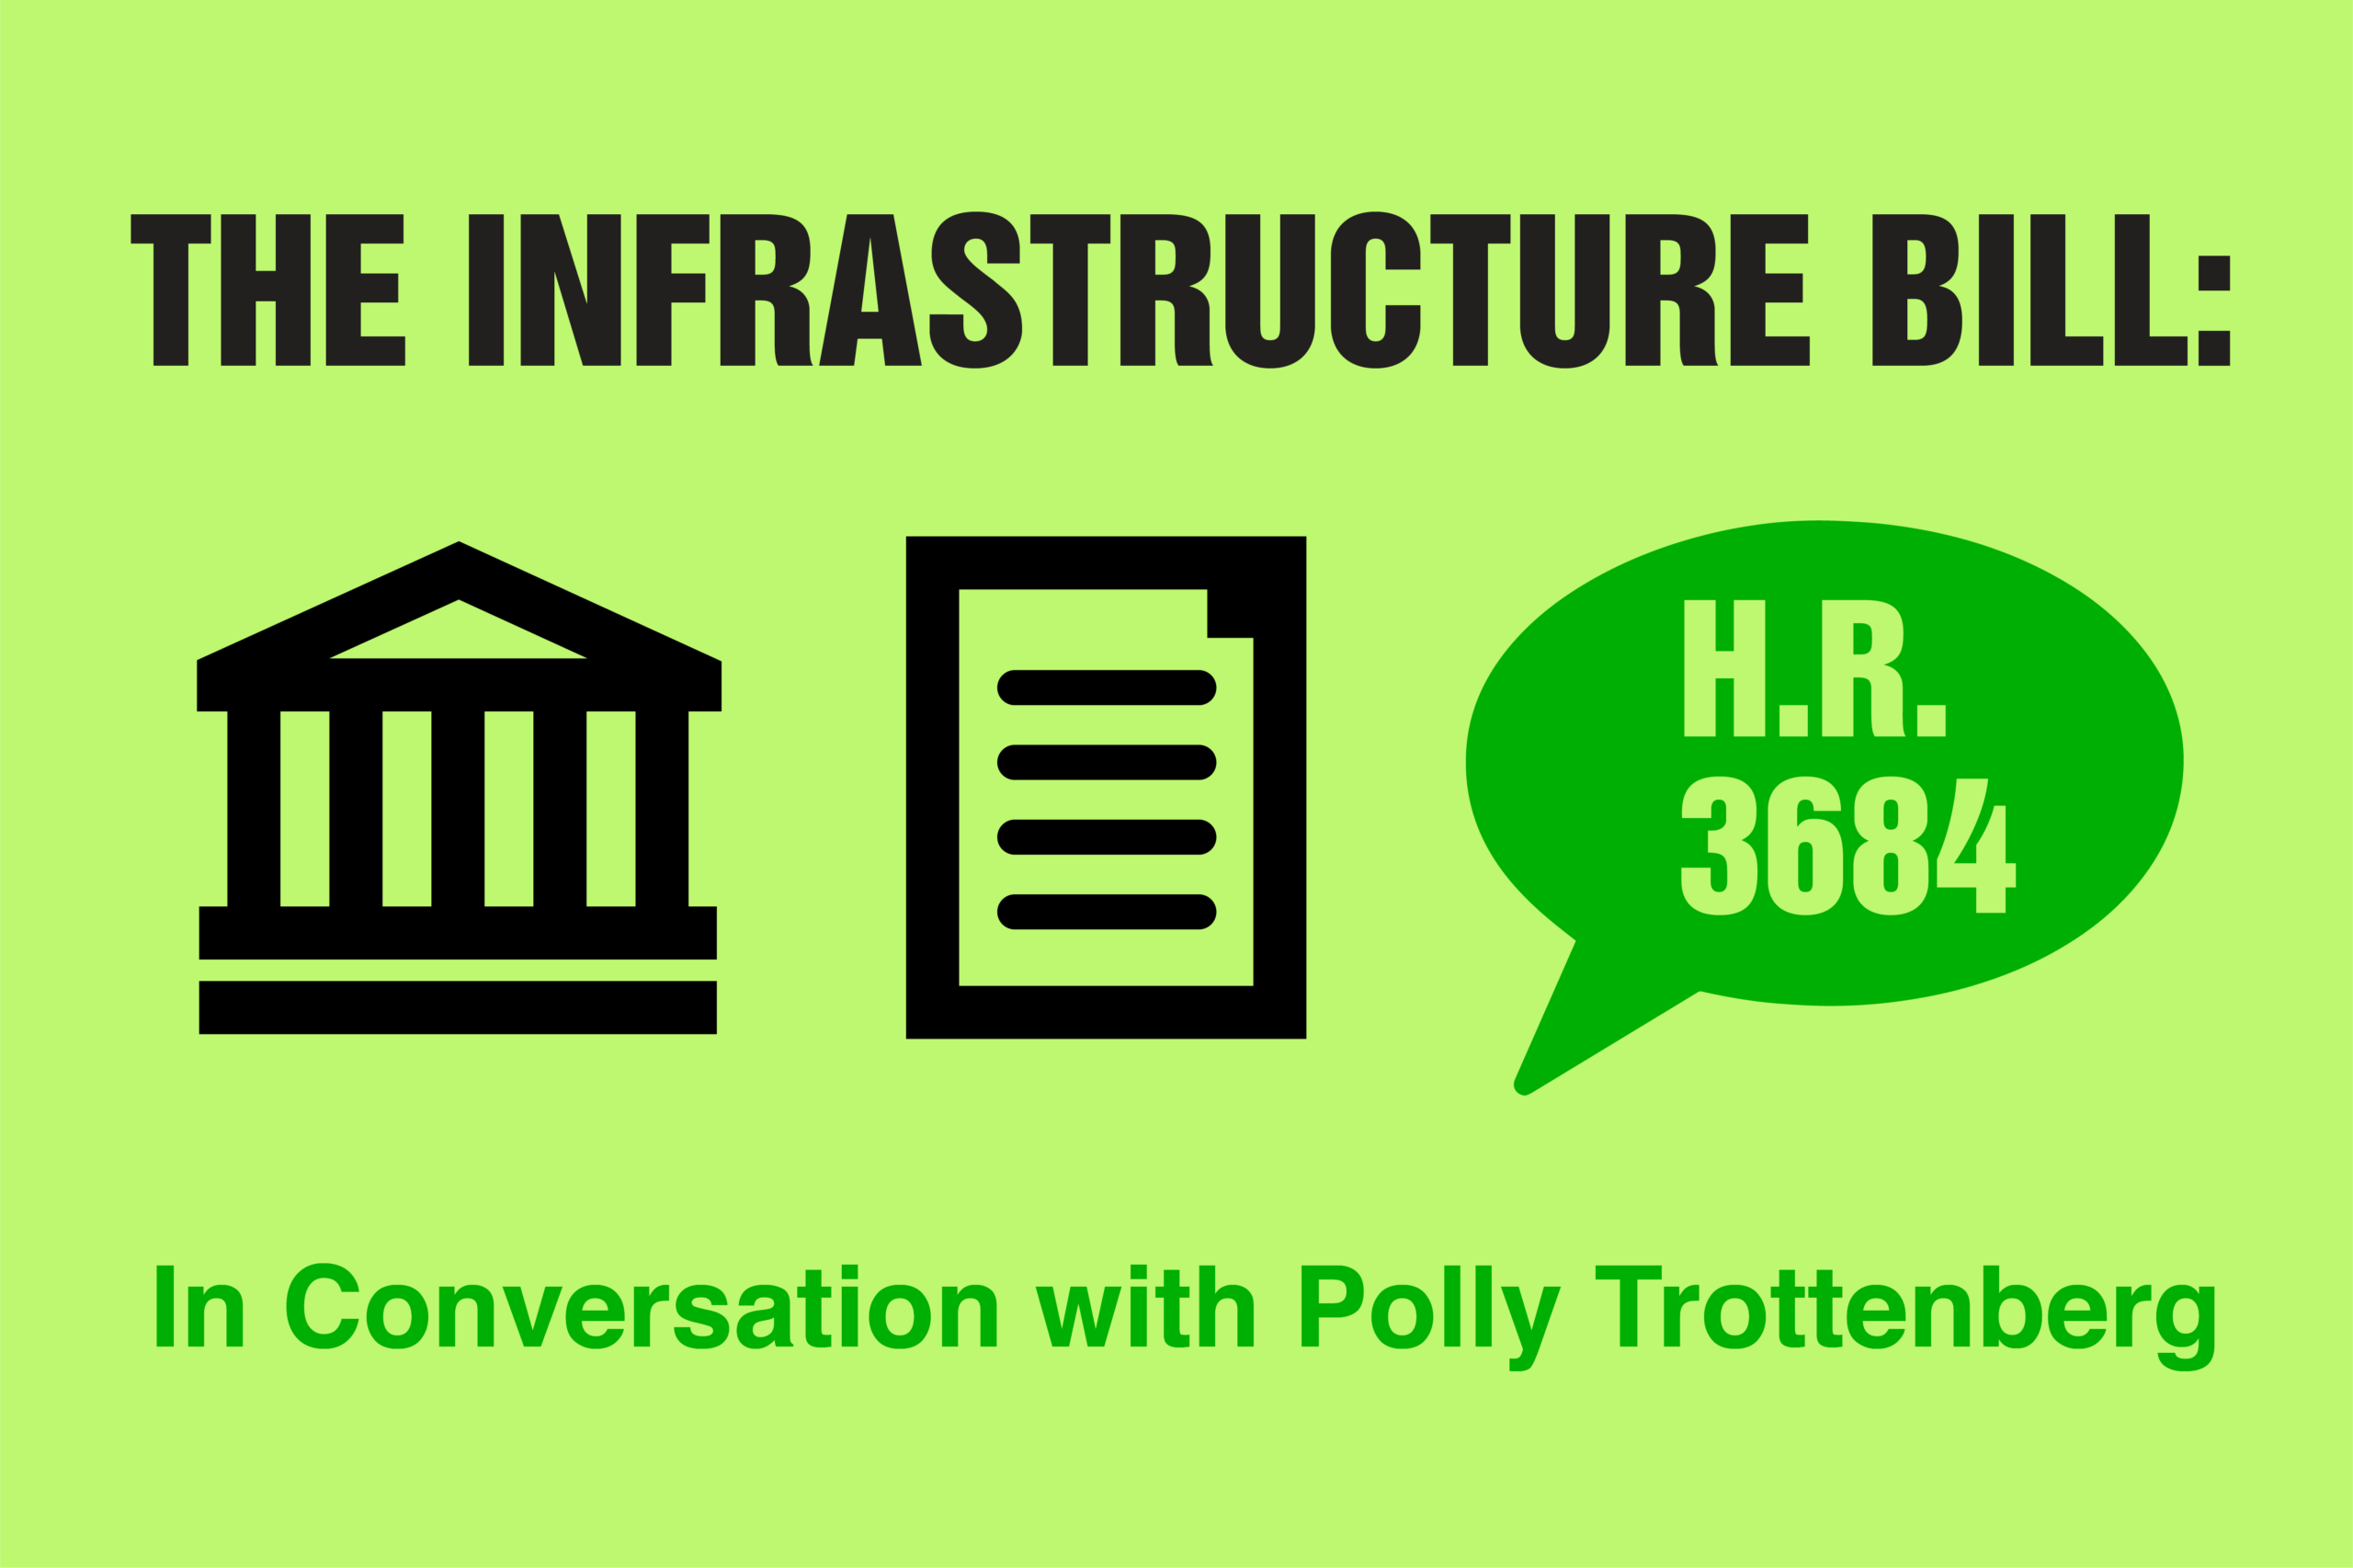 The Infrastructure Bill: In Conversation with Polly Trottenberg